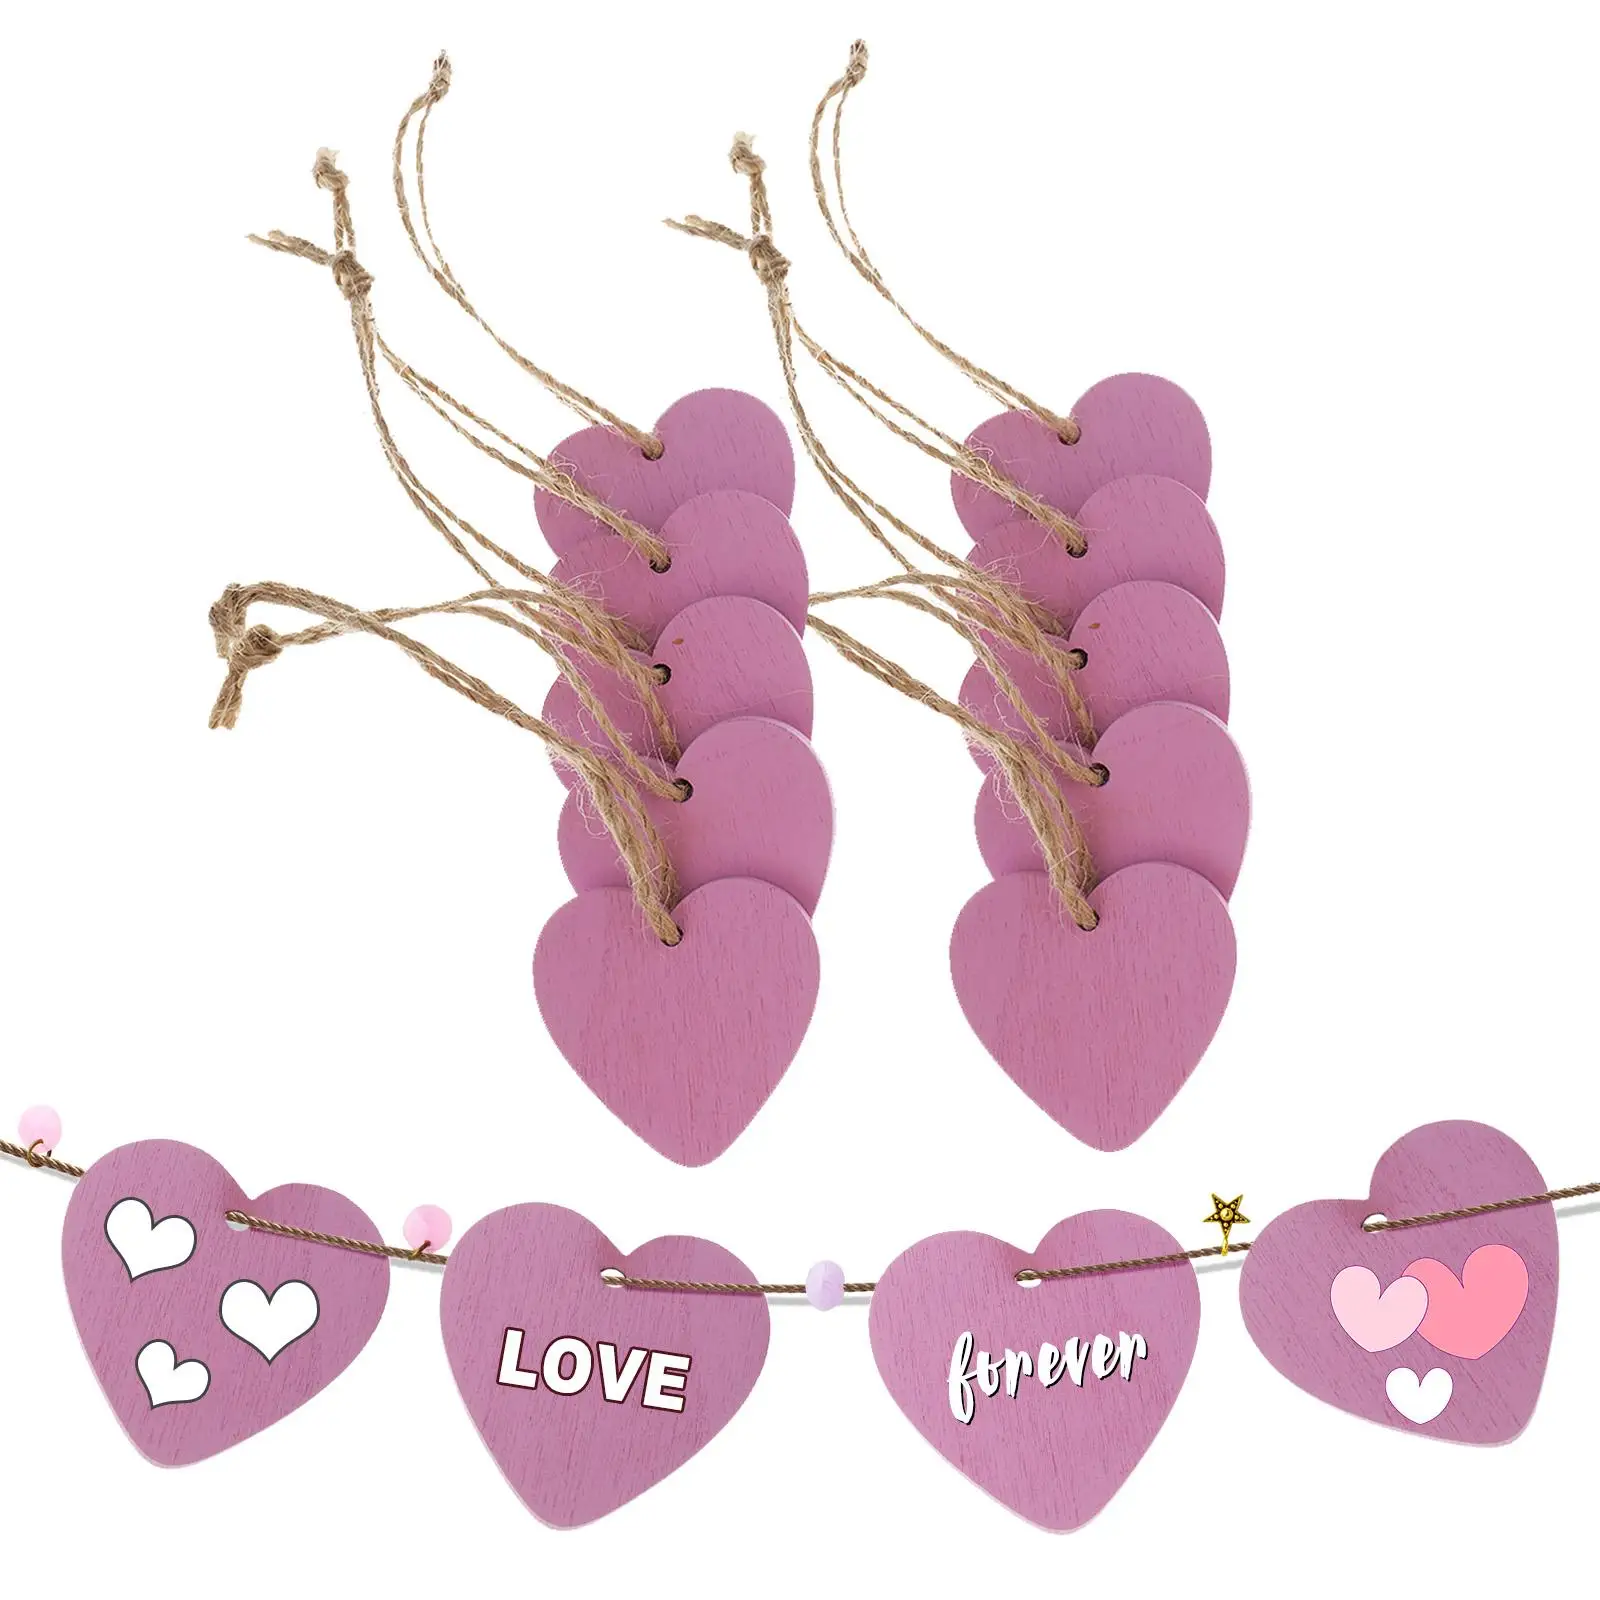 40pcs Wooden Embellishments Craft Wedding Name Tags with String Hanging DIY Projects Card Making